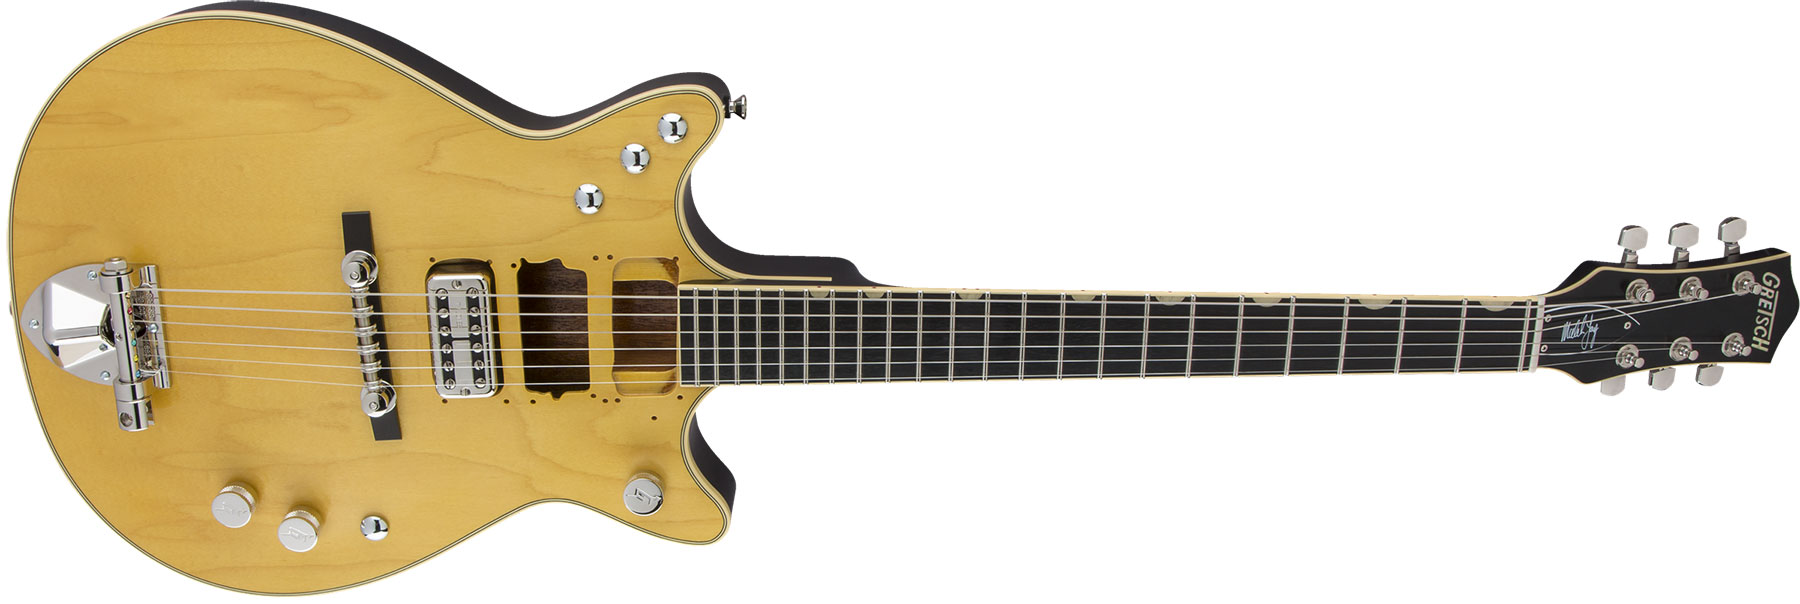 Gretsch Malcolm Young G6131-my Signature Jet Eb - Aged Natural - Double Cut E-Gitarre - Variation 1